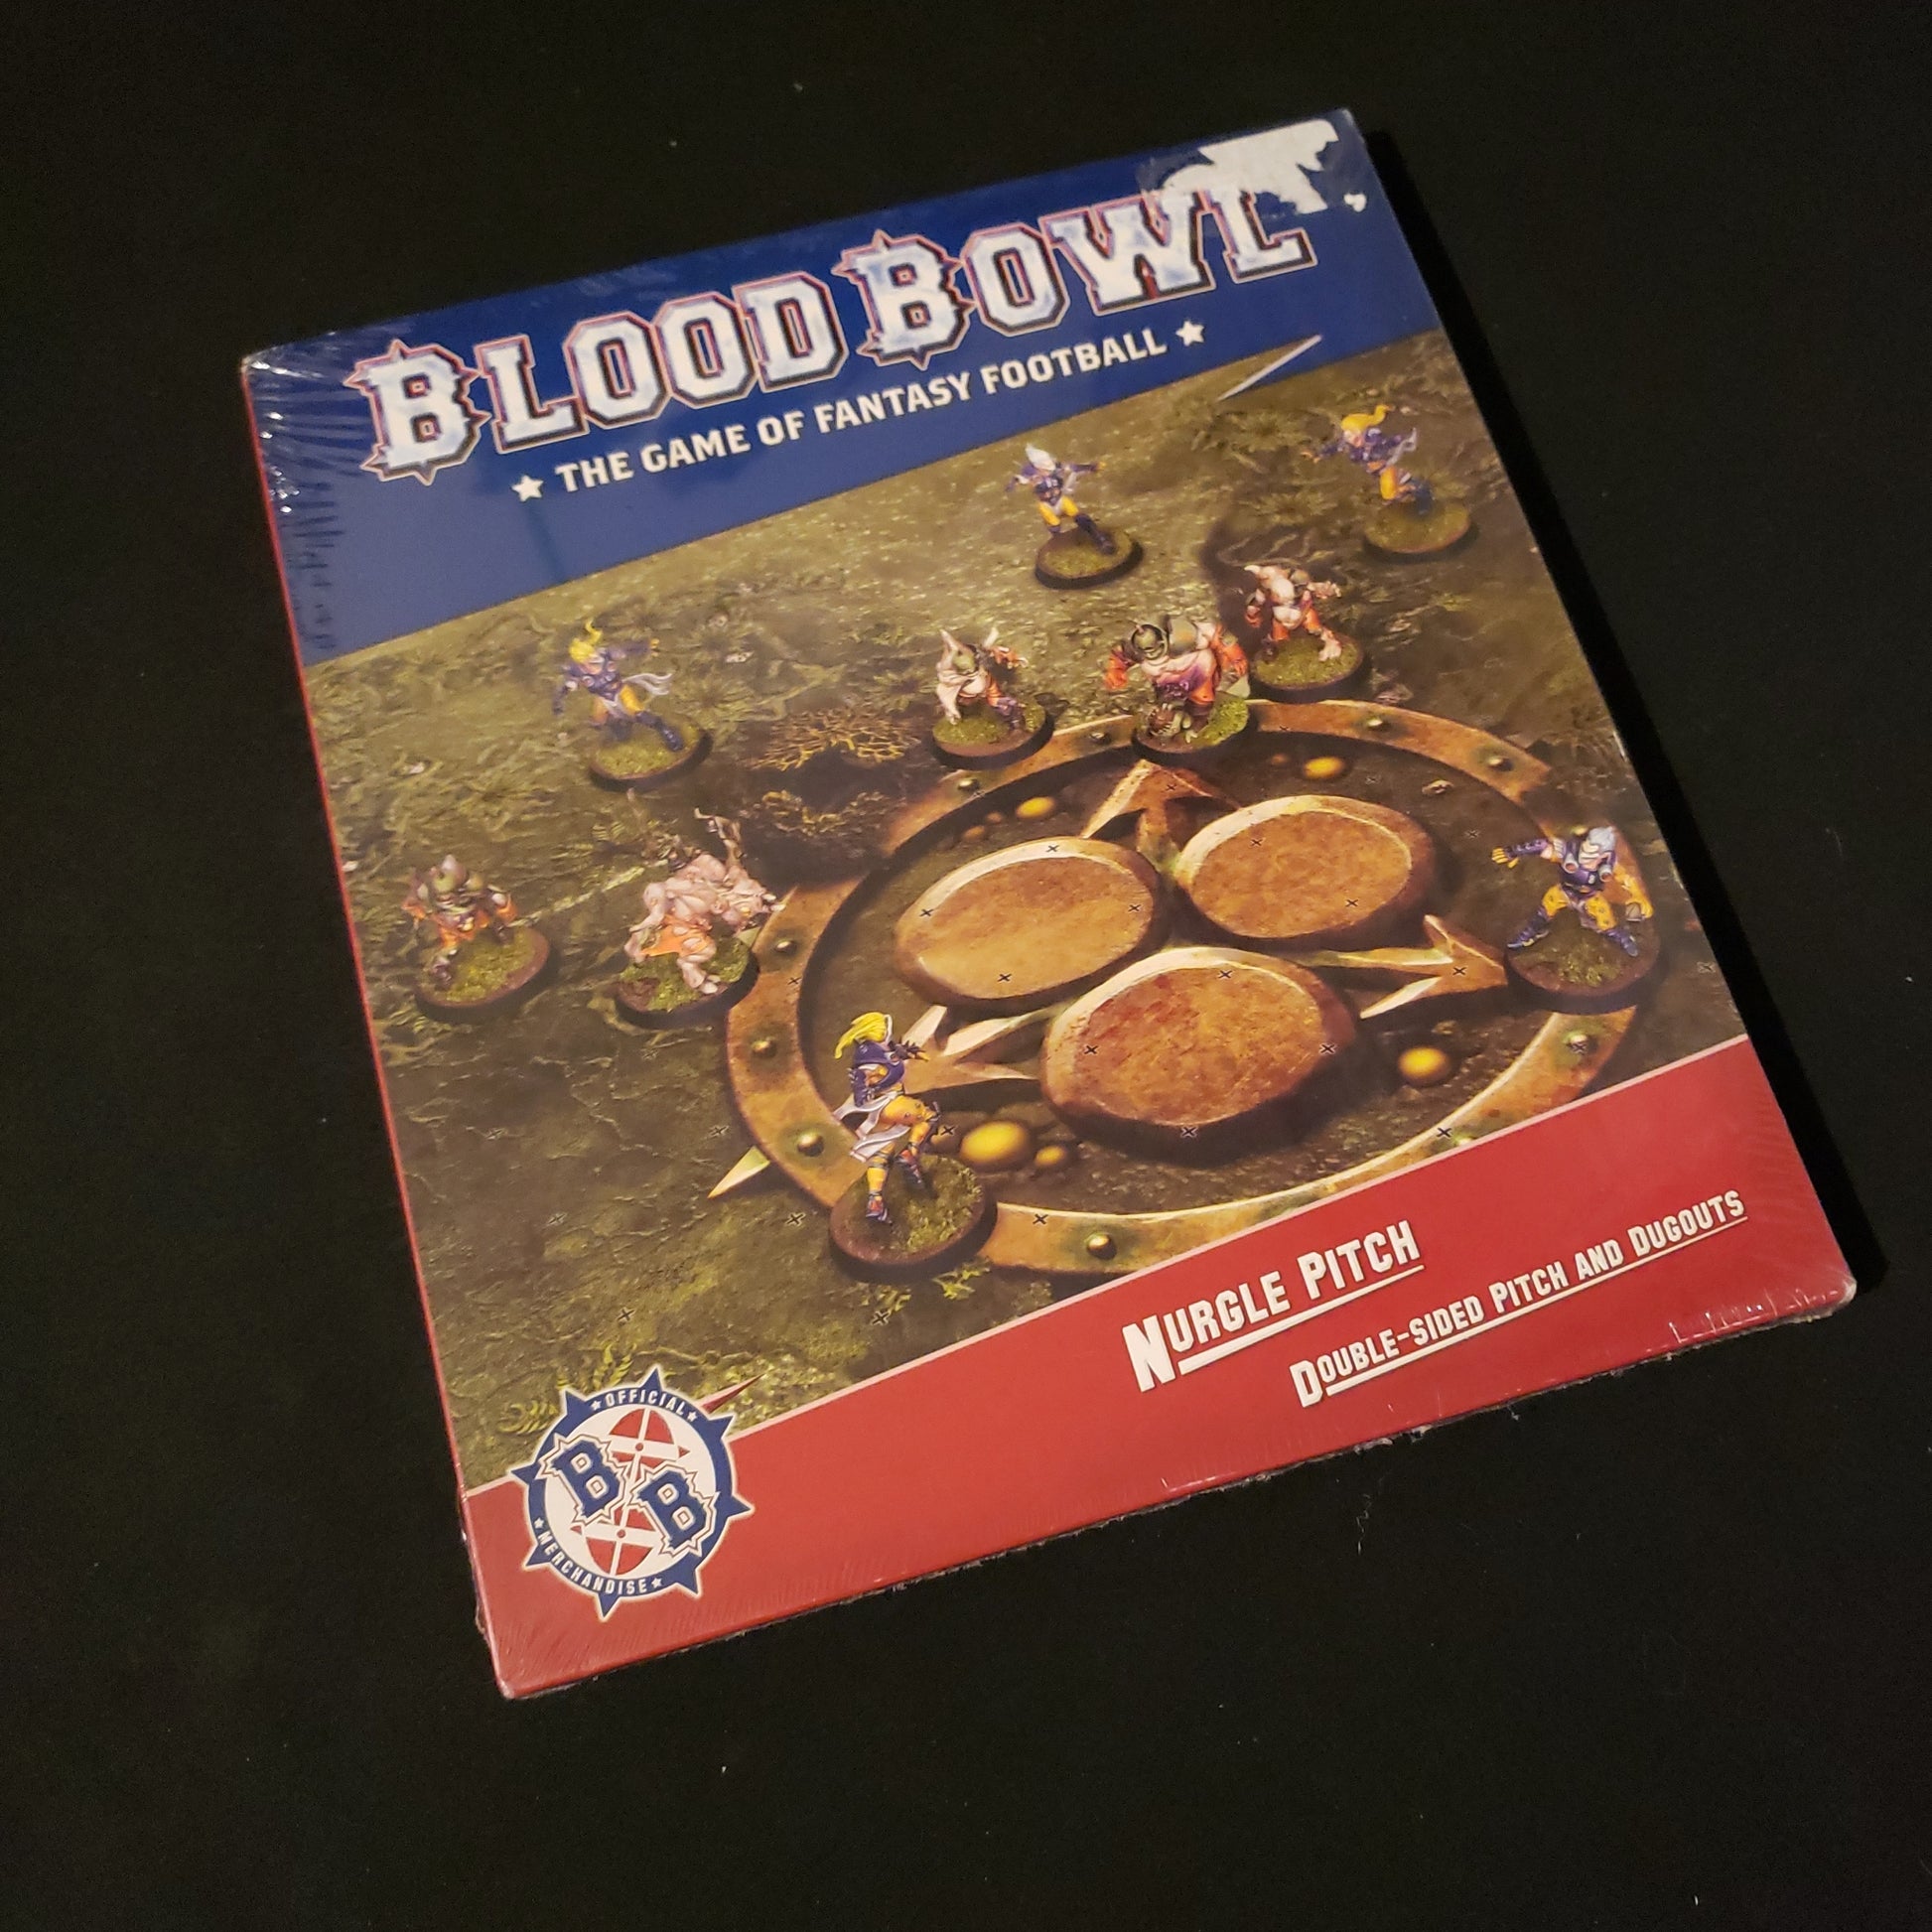 Image shows the front of the package for the Nurgle Pitch & Dugout Pack for the Blood Bowl miniatures game